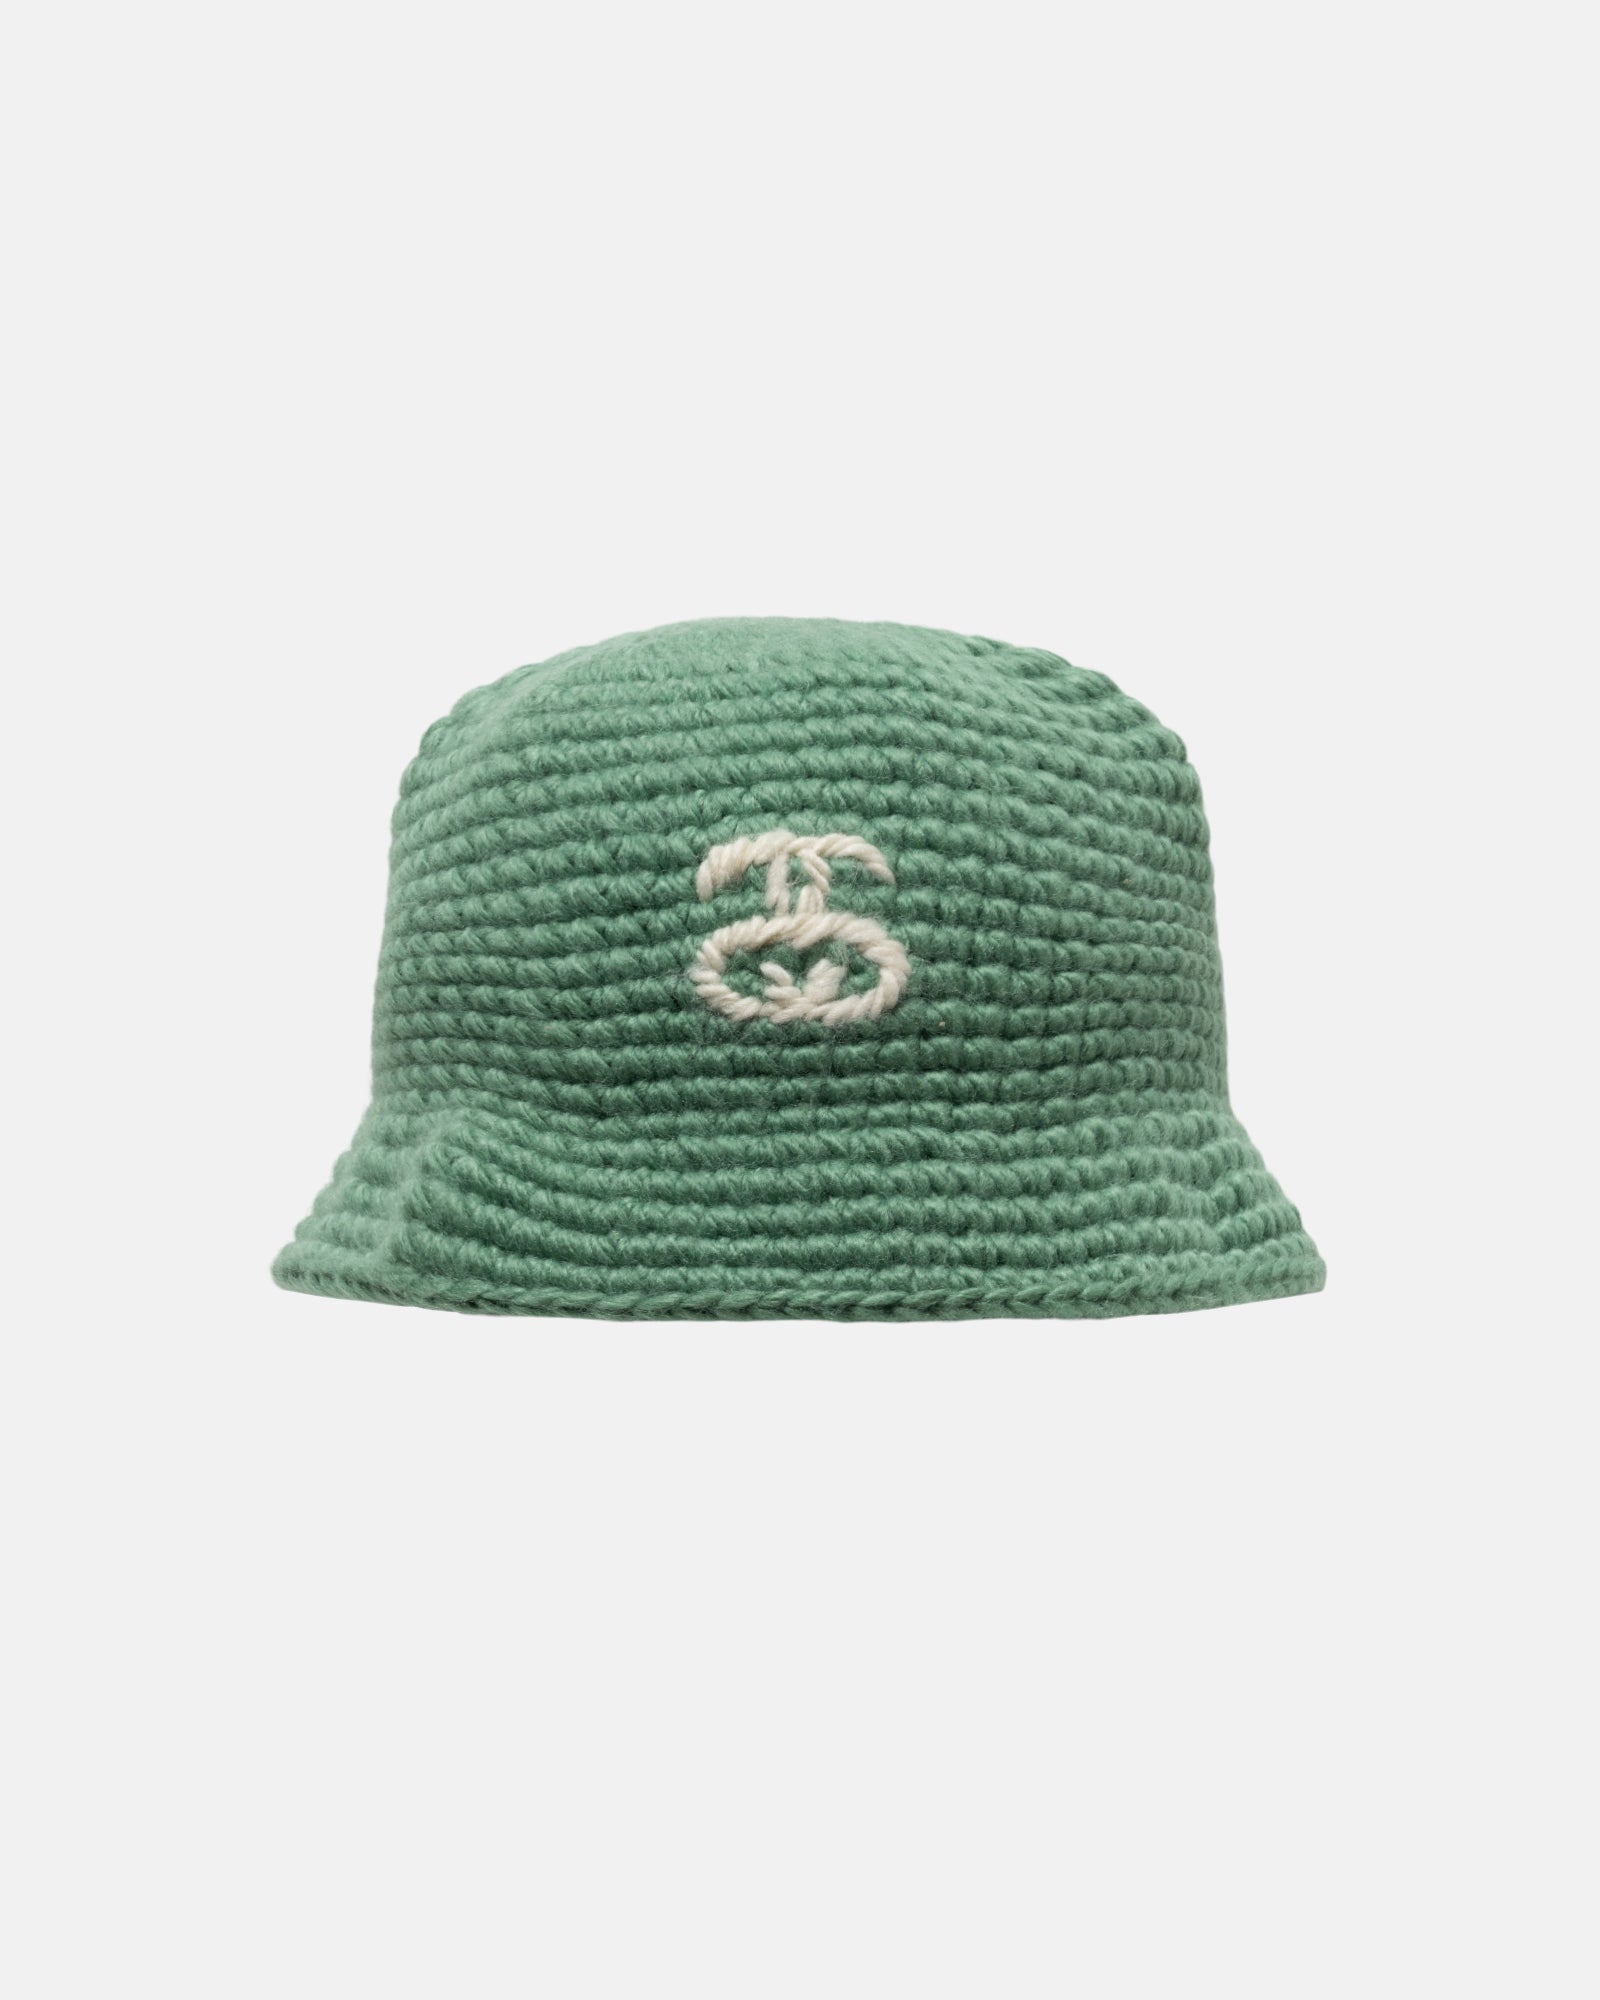 SS-LINK KNIT BUCKET HATハット